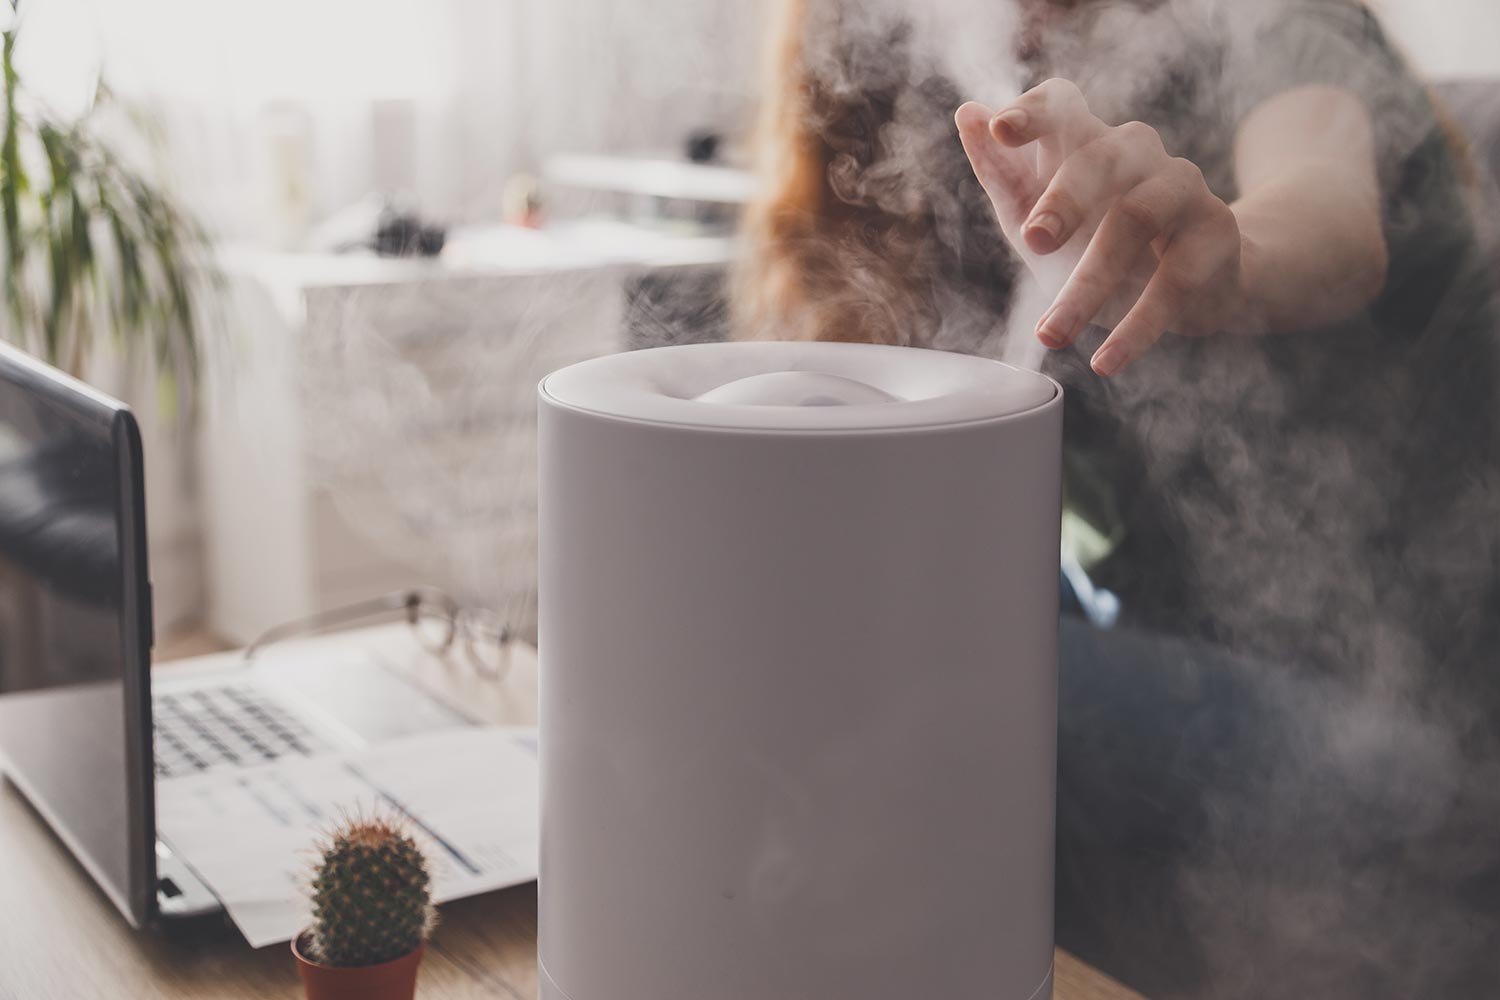 Woman freelancer uses a household humidifier in the workplace at home office